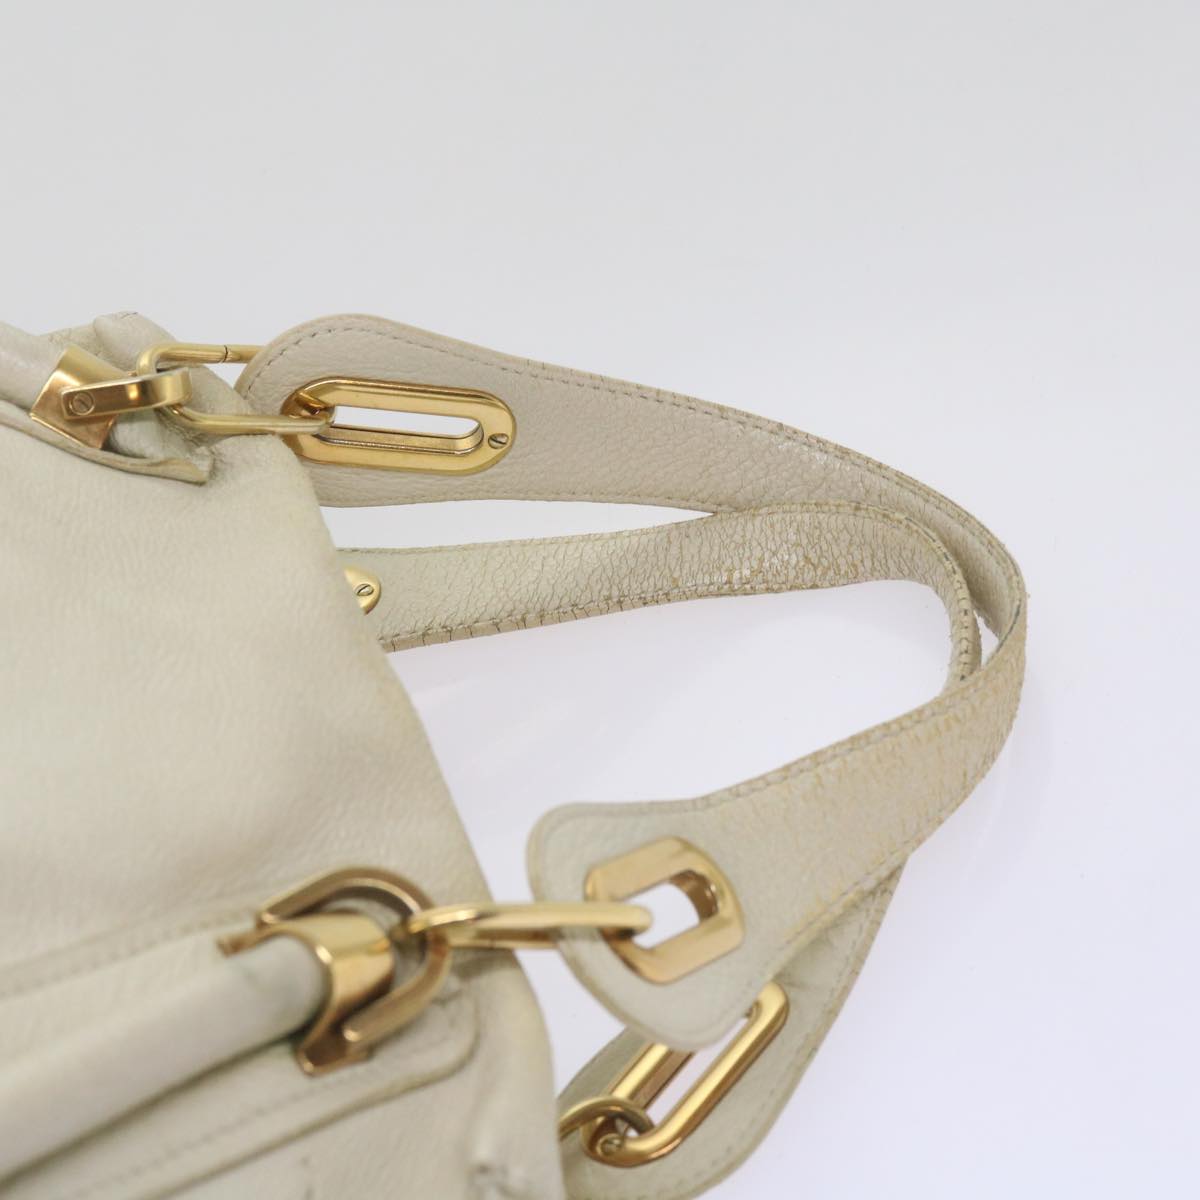 Chloe Mercy Shoulder Bag Leather White Auth 68076